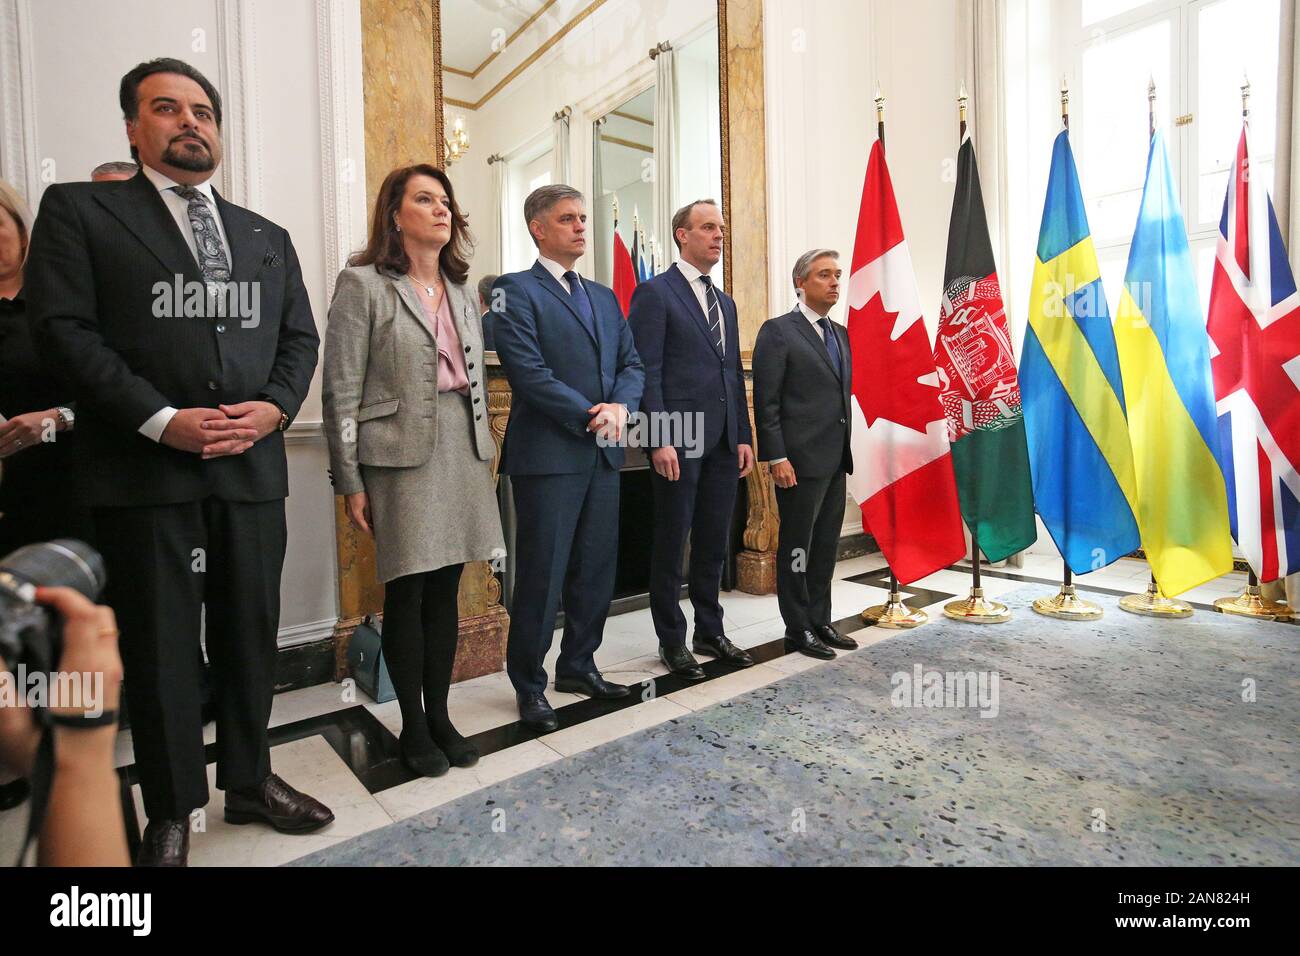 (left to right) Idrees Zaman, Acting Foreign Minister for Afghanistan, Ann Linde, Swedish Minister of Foreign Affairs, Vadym Prystaiko, Ukrainian Minister of Foreign Affairs, Foreign Secretary Dominic Raab and Francois-Philippe Champagne, Canadian Minister of Foreign Affairs, during a moment of reflection at Canada House, central London for the passengers of the Ukrainian International Airlines flight that crashed just minutes after taking off from Imam Khomeini International Airport in Tehran, killing 176 people. Stock Photo